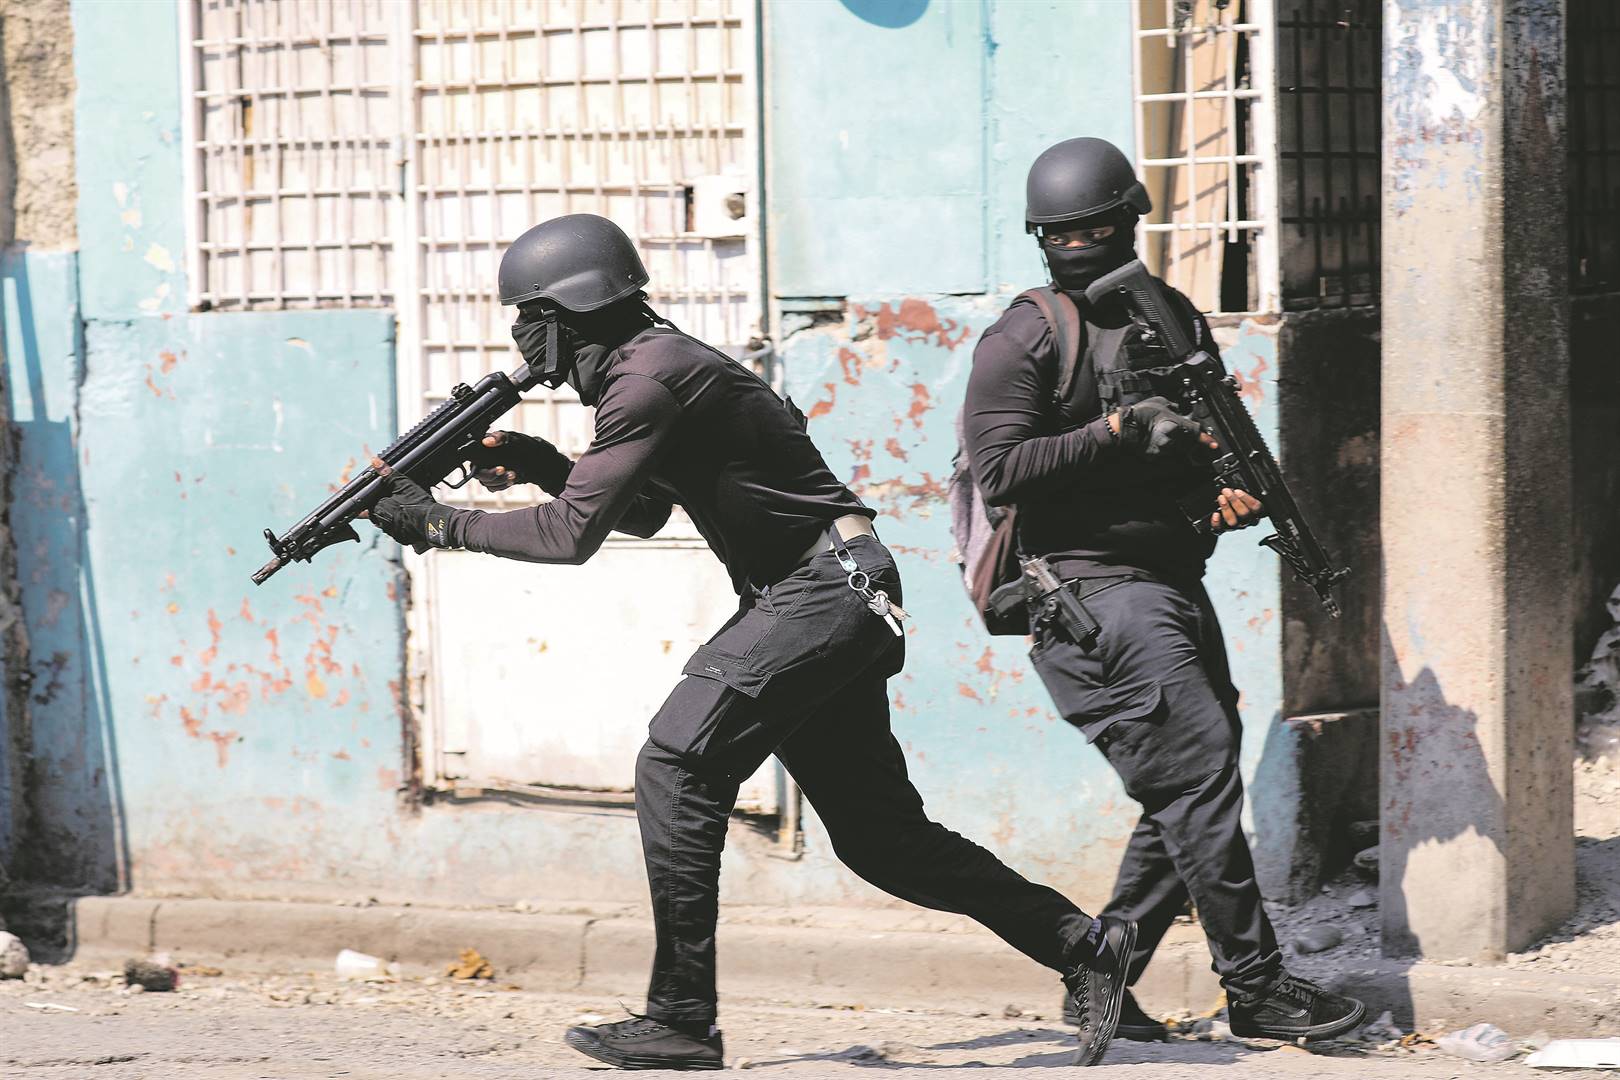 Is Kenya’s policing initiative for Haiti imperialistic?